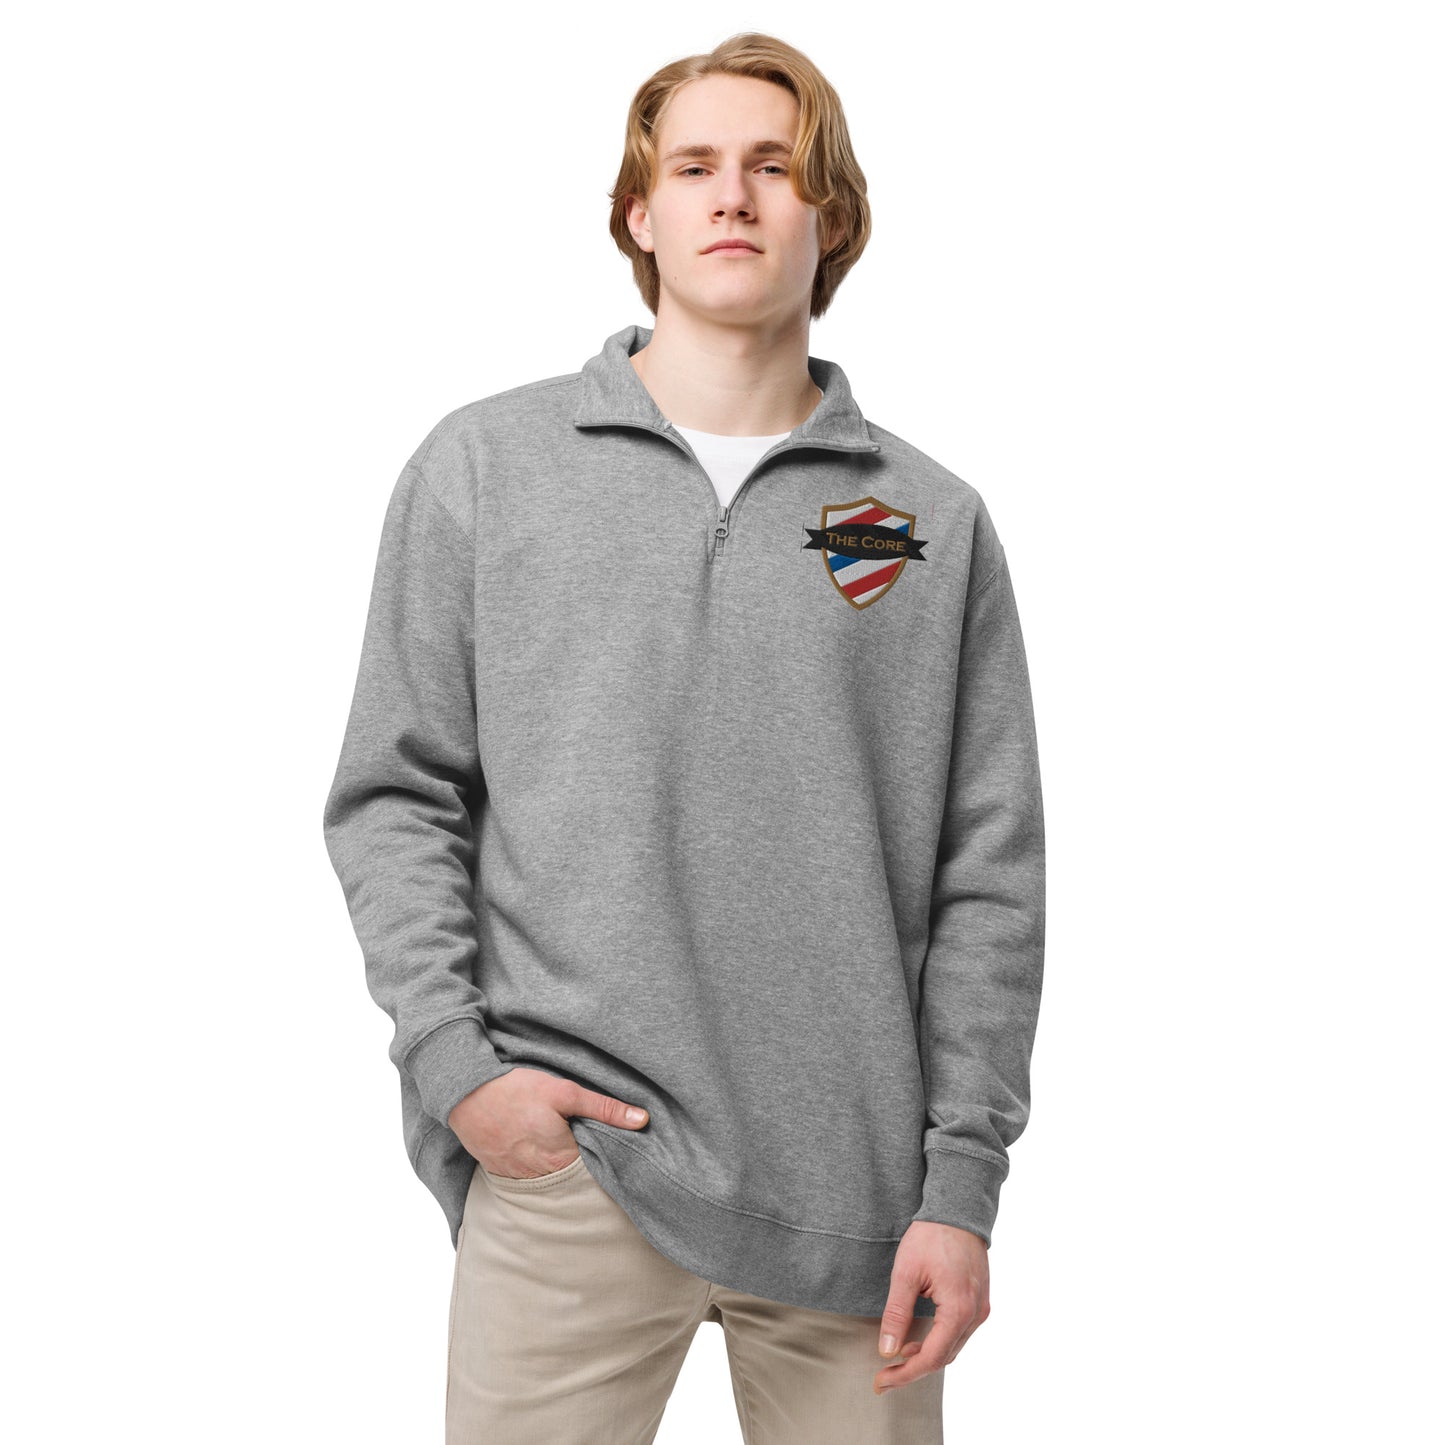 The Core - Embroidered Unisex fleece pullover